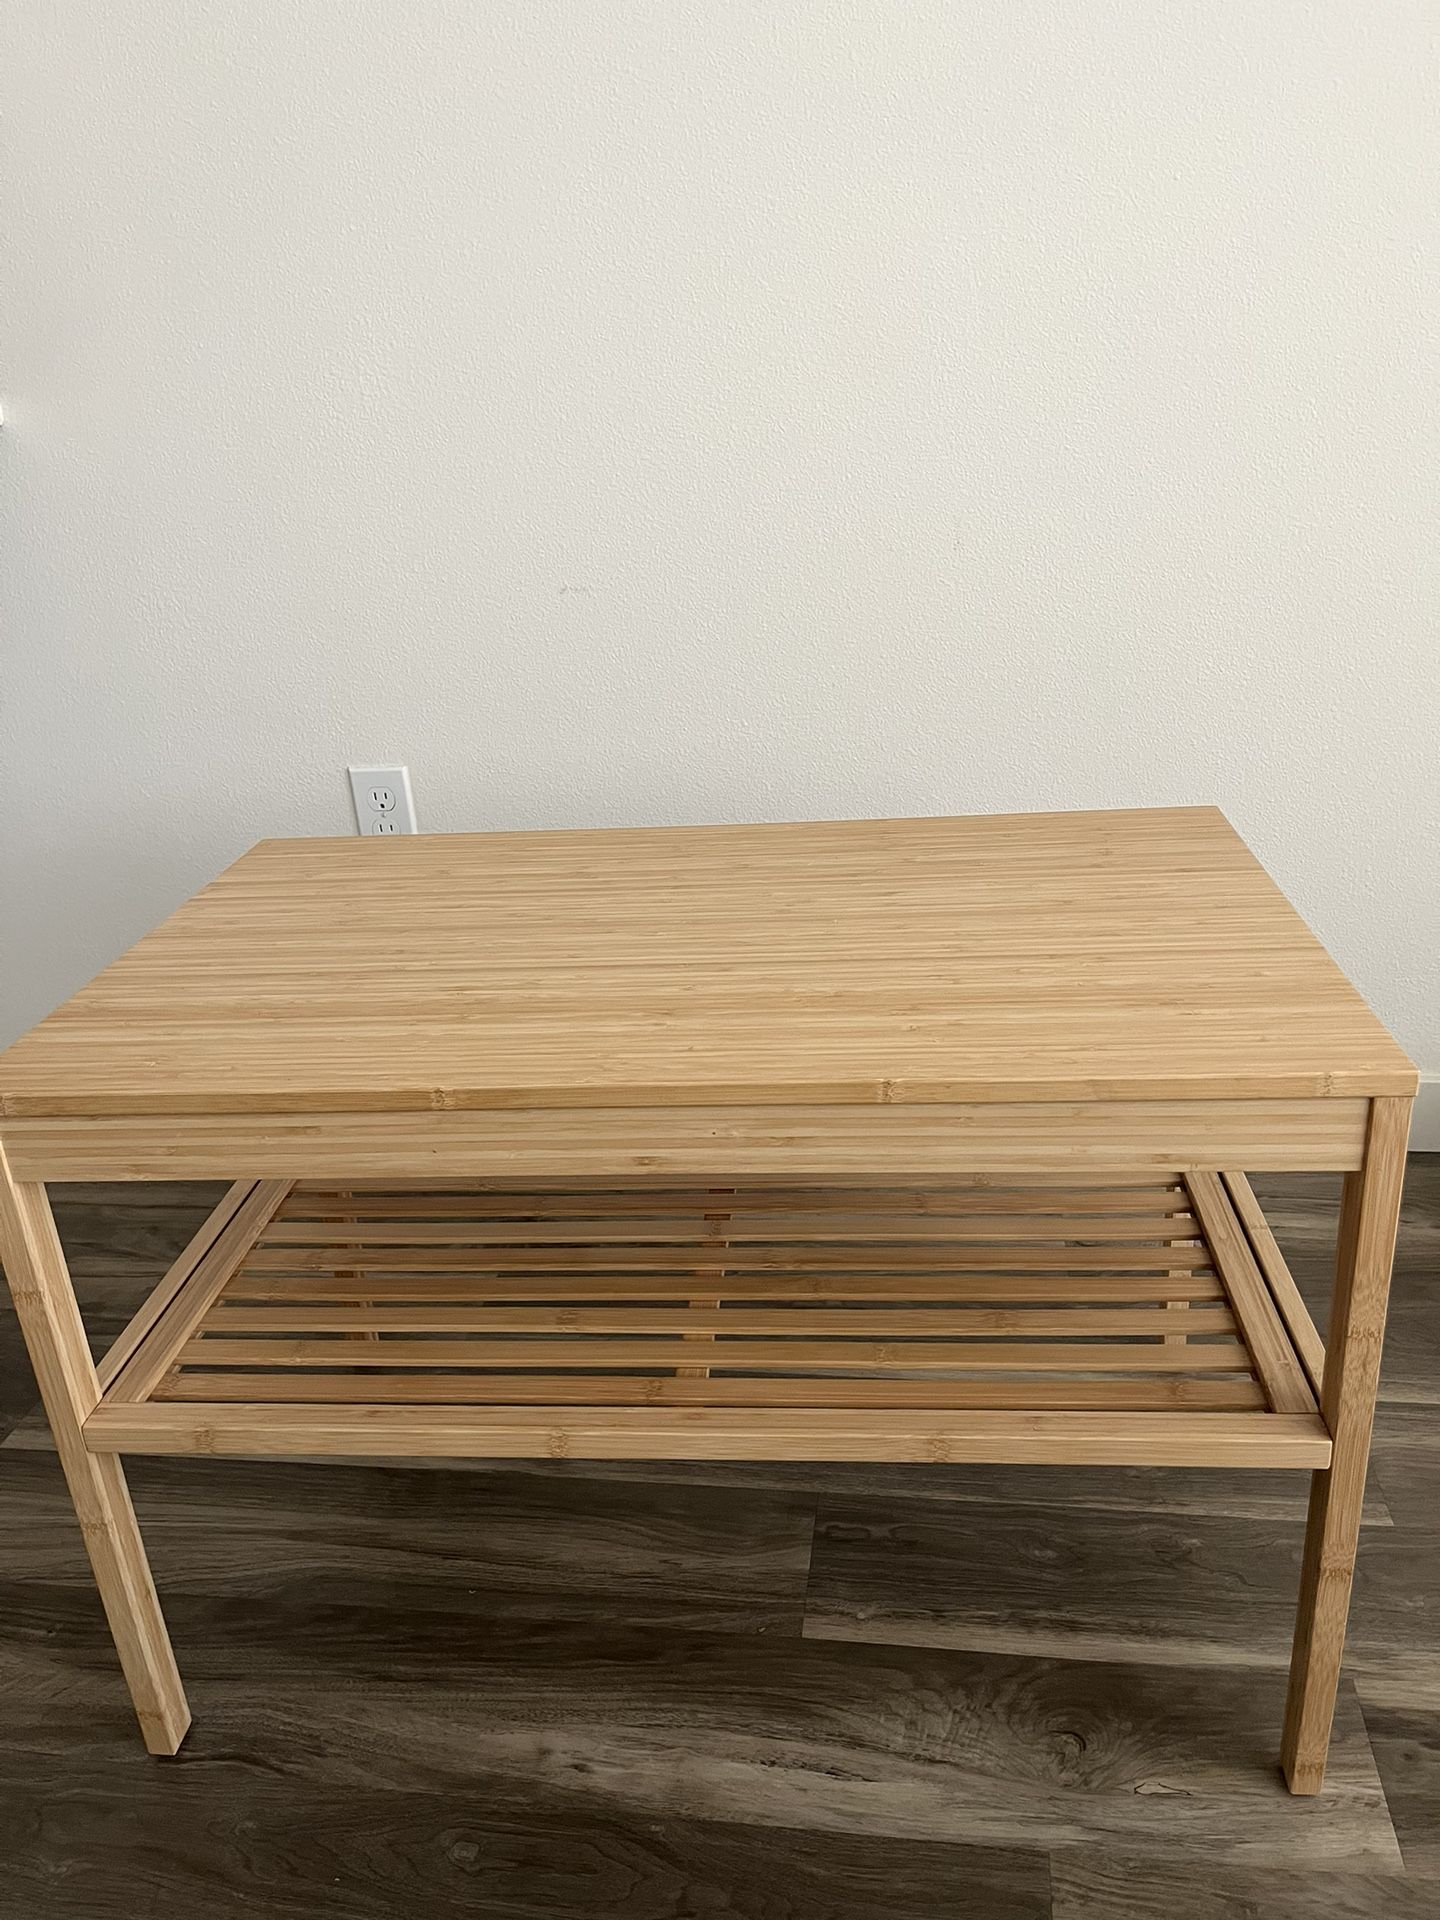 Bamboo Coffee Table/Bench